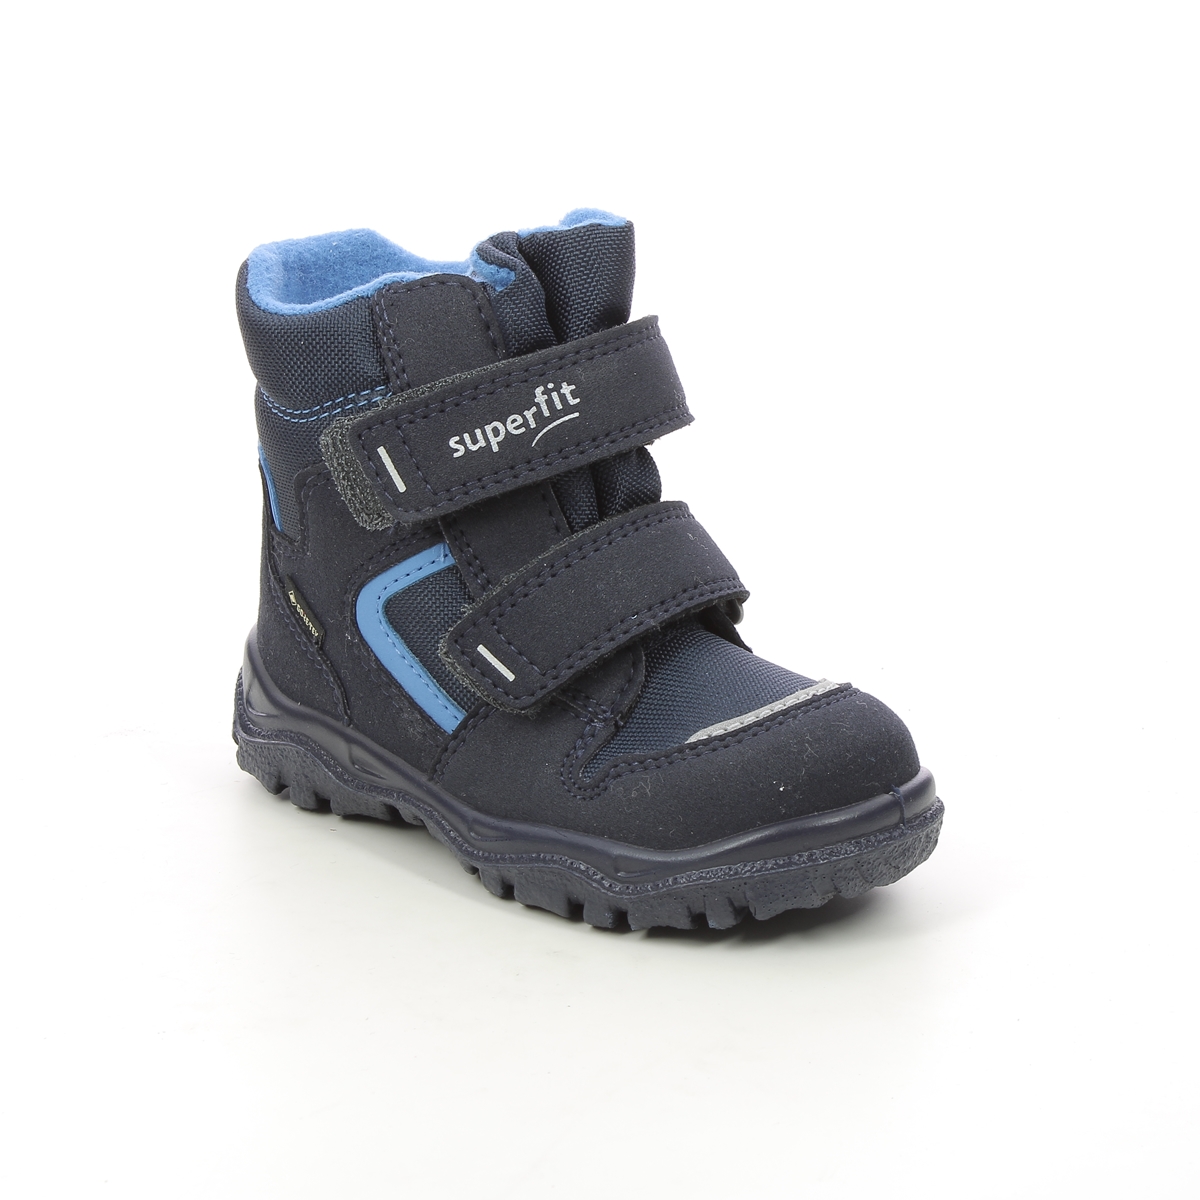 Superfit Husky Inf Gtx Navy Kids Toddler Boys Boots 1000047-8000 In Size 22 In Plain Navy